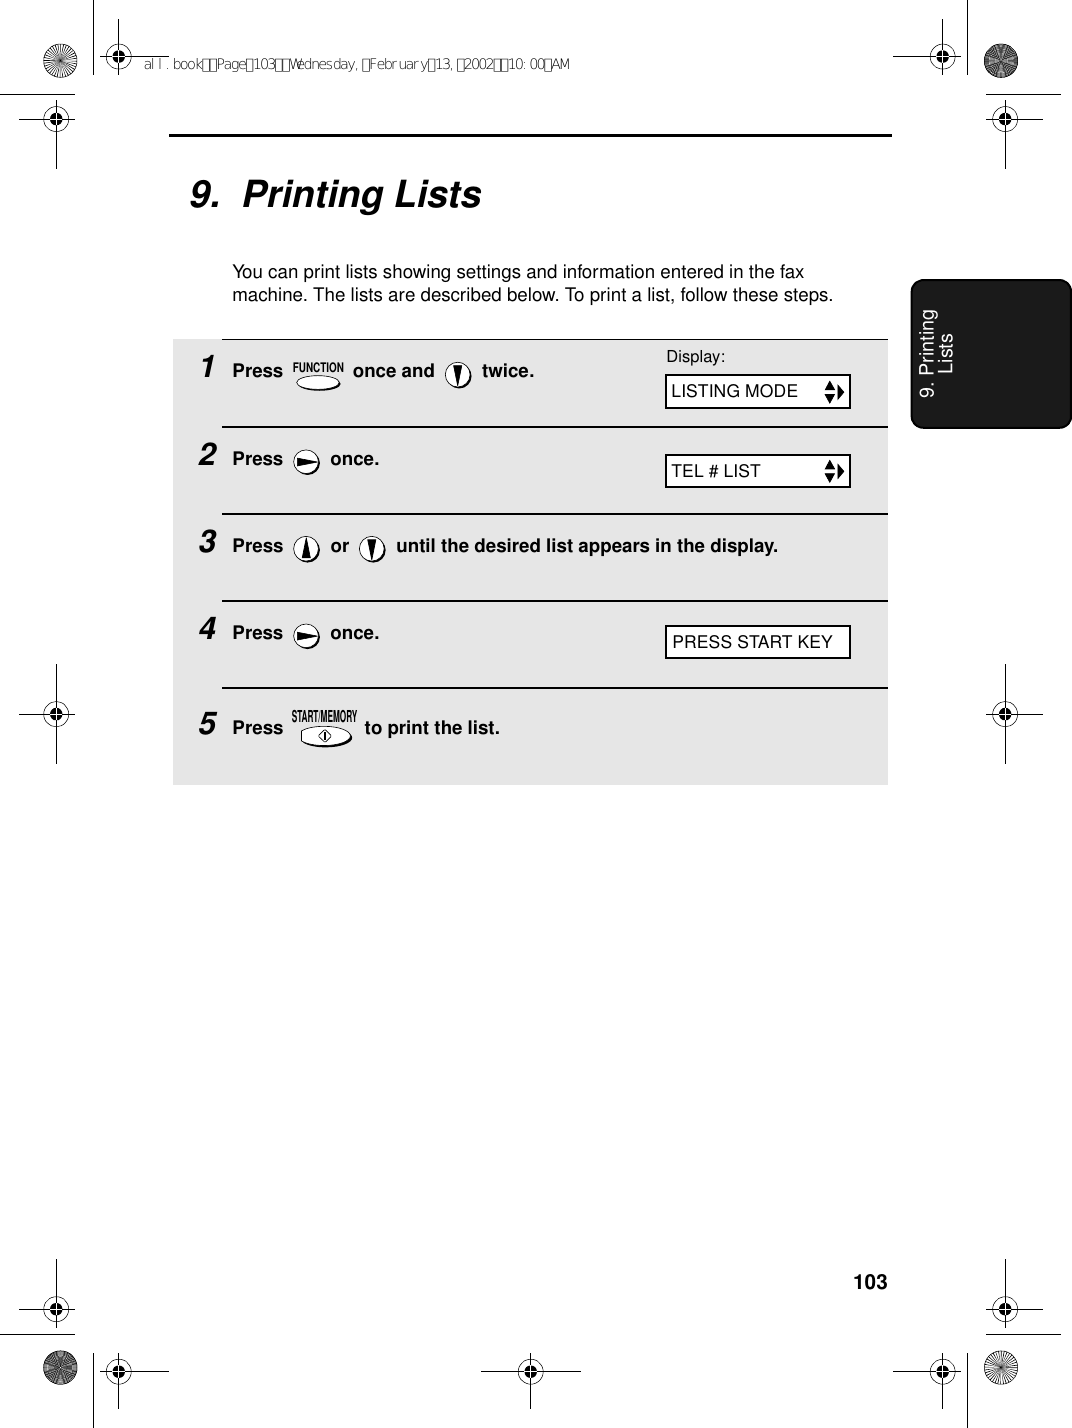 1039. Printing Lists9.  Printing ListsYou can print lists showing settings and information entered in the fax machine. The lists are described below. To print a list, follow these steps.1Press   once and   twice.2Press  once.3Press   or   until the desired list appears in the display.4Press  once.5Press   to print the list.FUNCTIONSTART/MEMORYDisplay:LISTING MODETEL # LISTPRESS START KEYall.bookPage103Wednesday,February13,200210:00AM